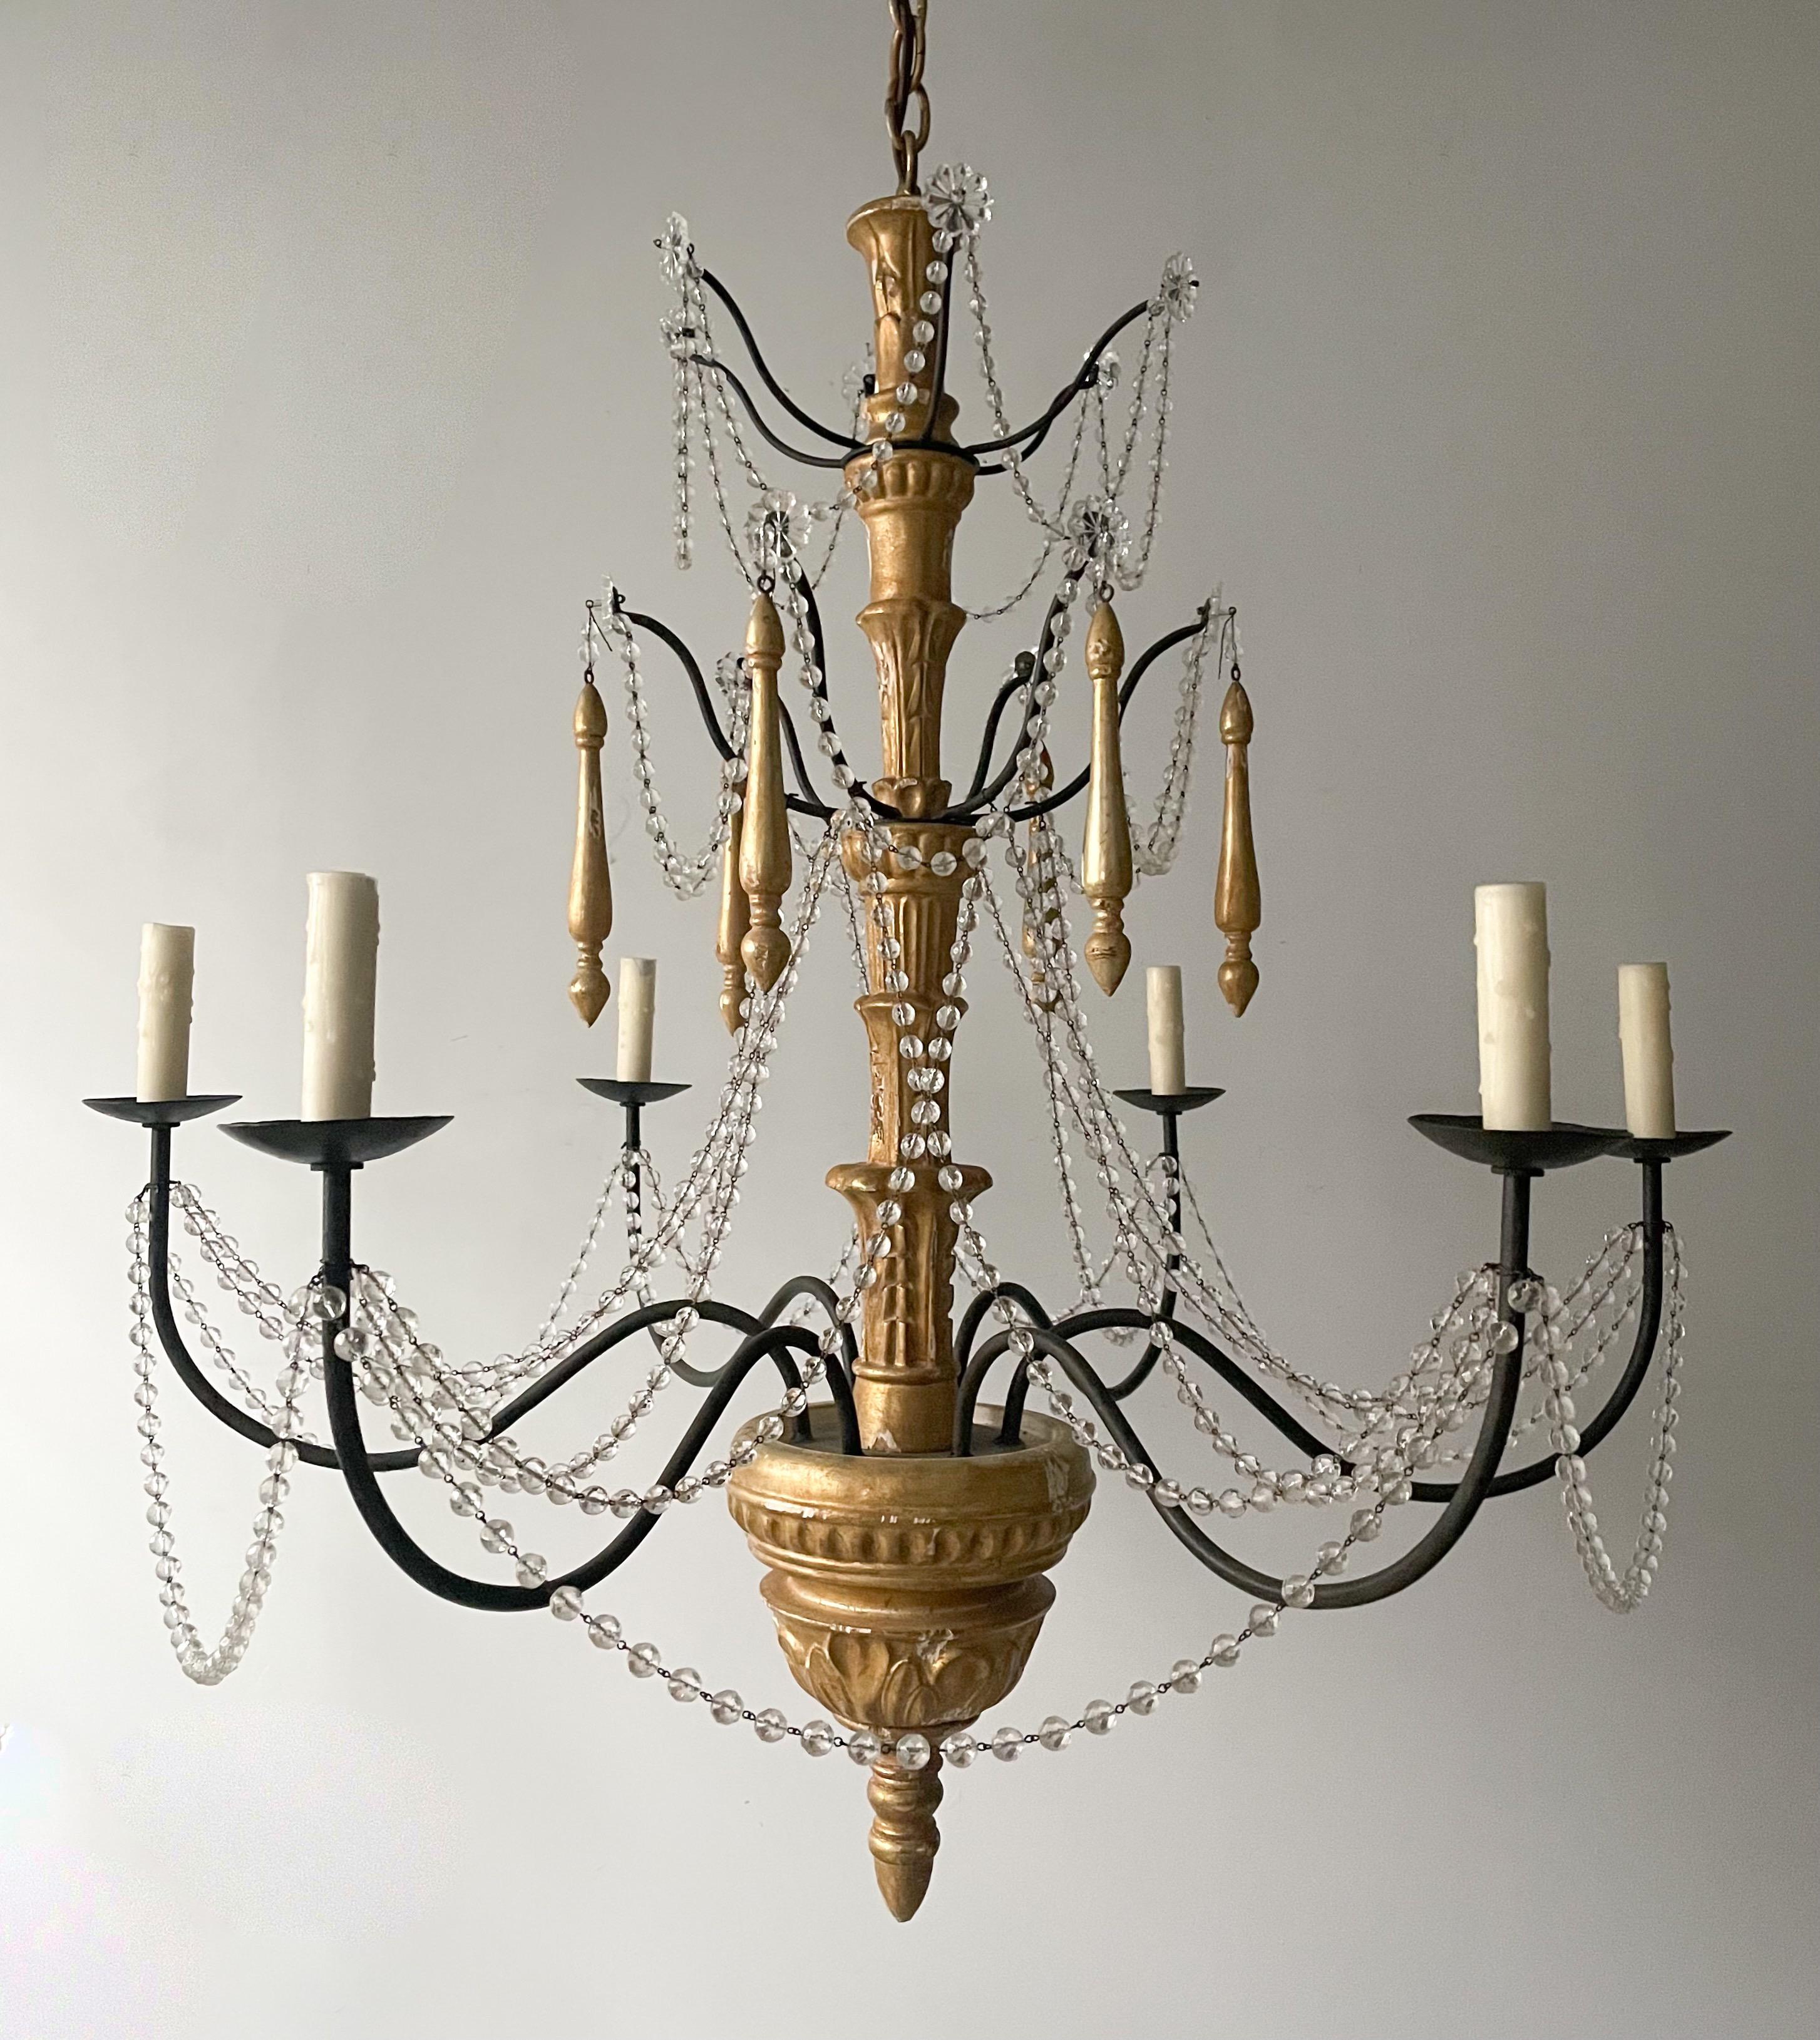 Gorgeous, vintage giltwood, iron and crystal chandelier in the Genovese style.

The chandelier consists of a carved wood column in a distressed, gilded finish and decorated with crystal bead garlands. 

The chandelier is wired and in working